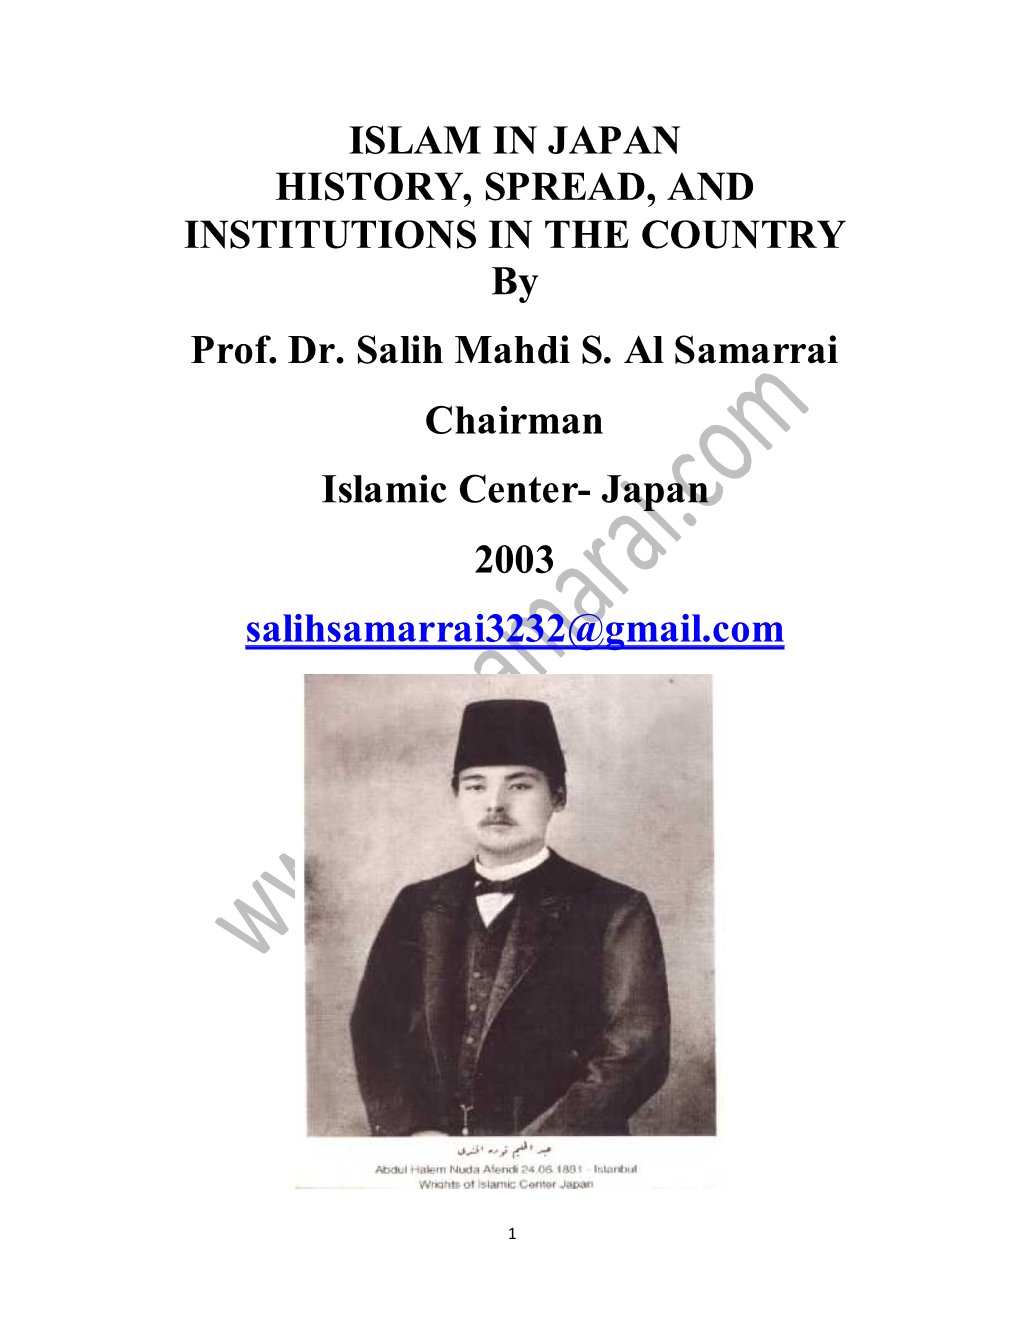 ISLAM in JAPAN HISTORY, SPREAD, and INSTITUTIONS in the COUNTRY by Prof